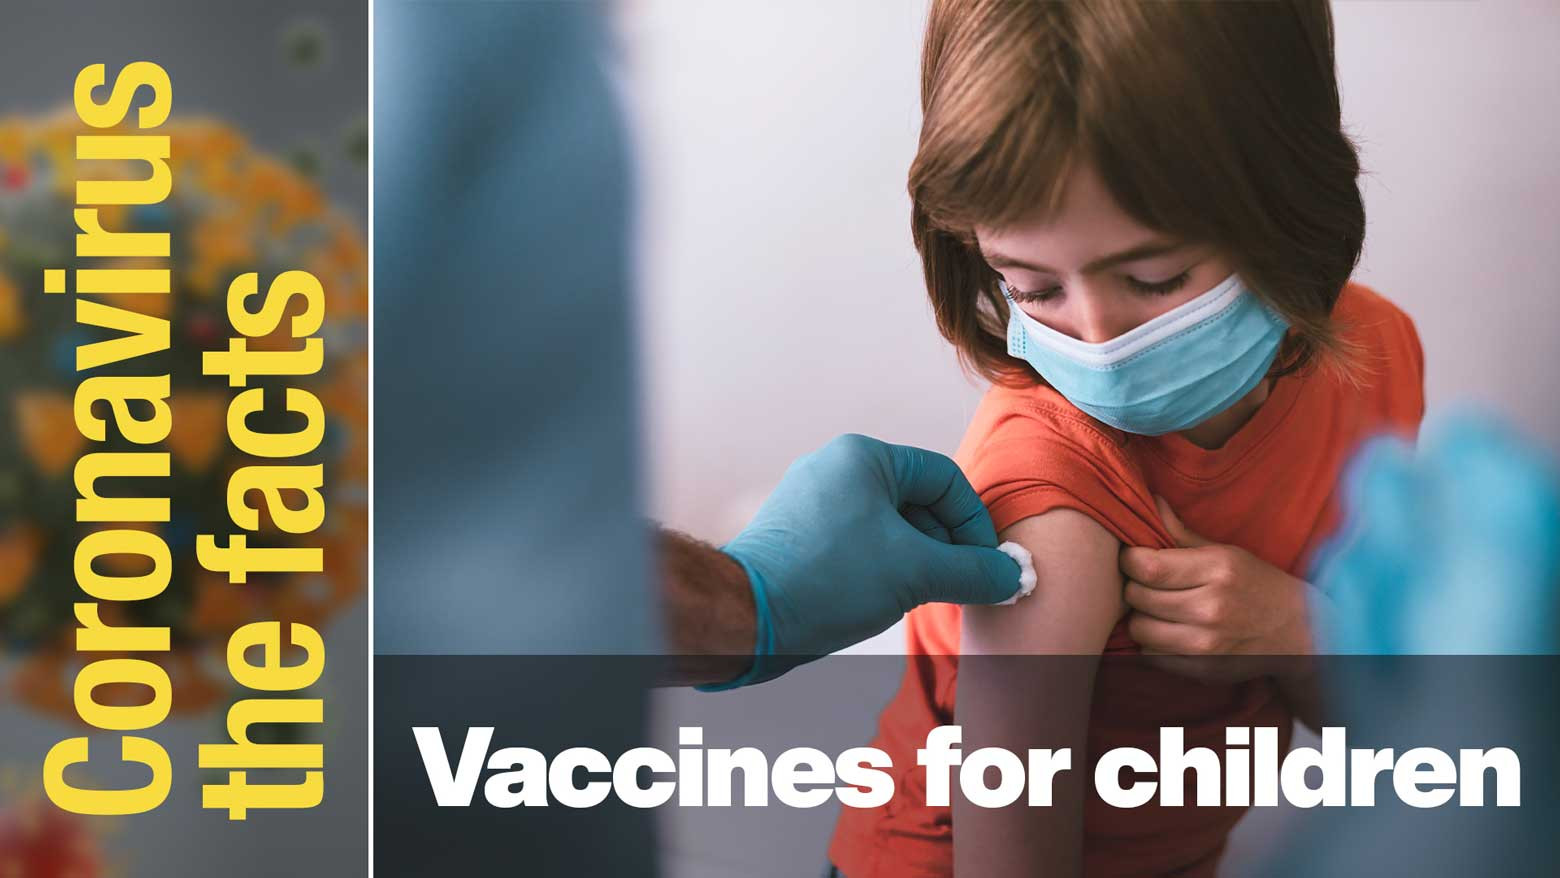 Should Japan follow the US and vaccinate young children?